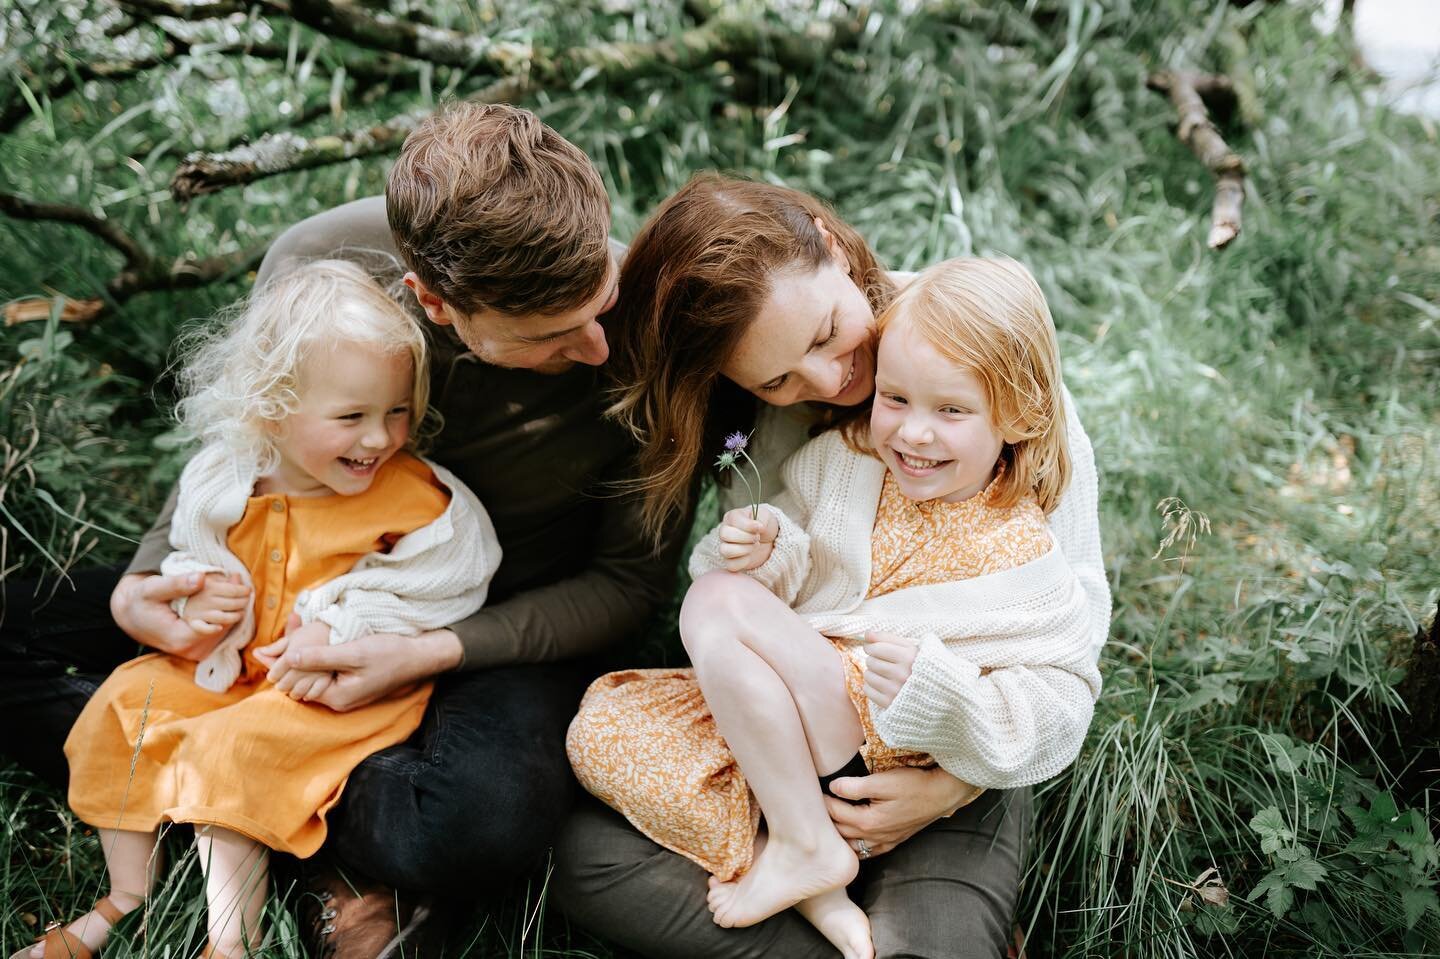 Autumn is in the air&hellip;&hellip;it&rsquo;s the perfect season for a family session!! #autumn #familyphotography #scotland #balloch #scottishphotographer